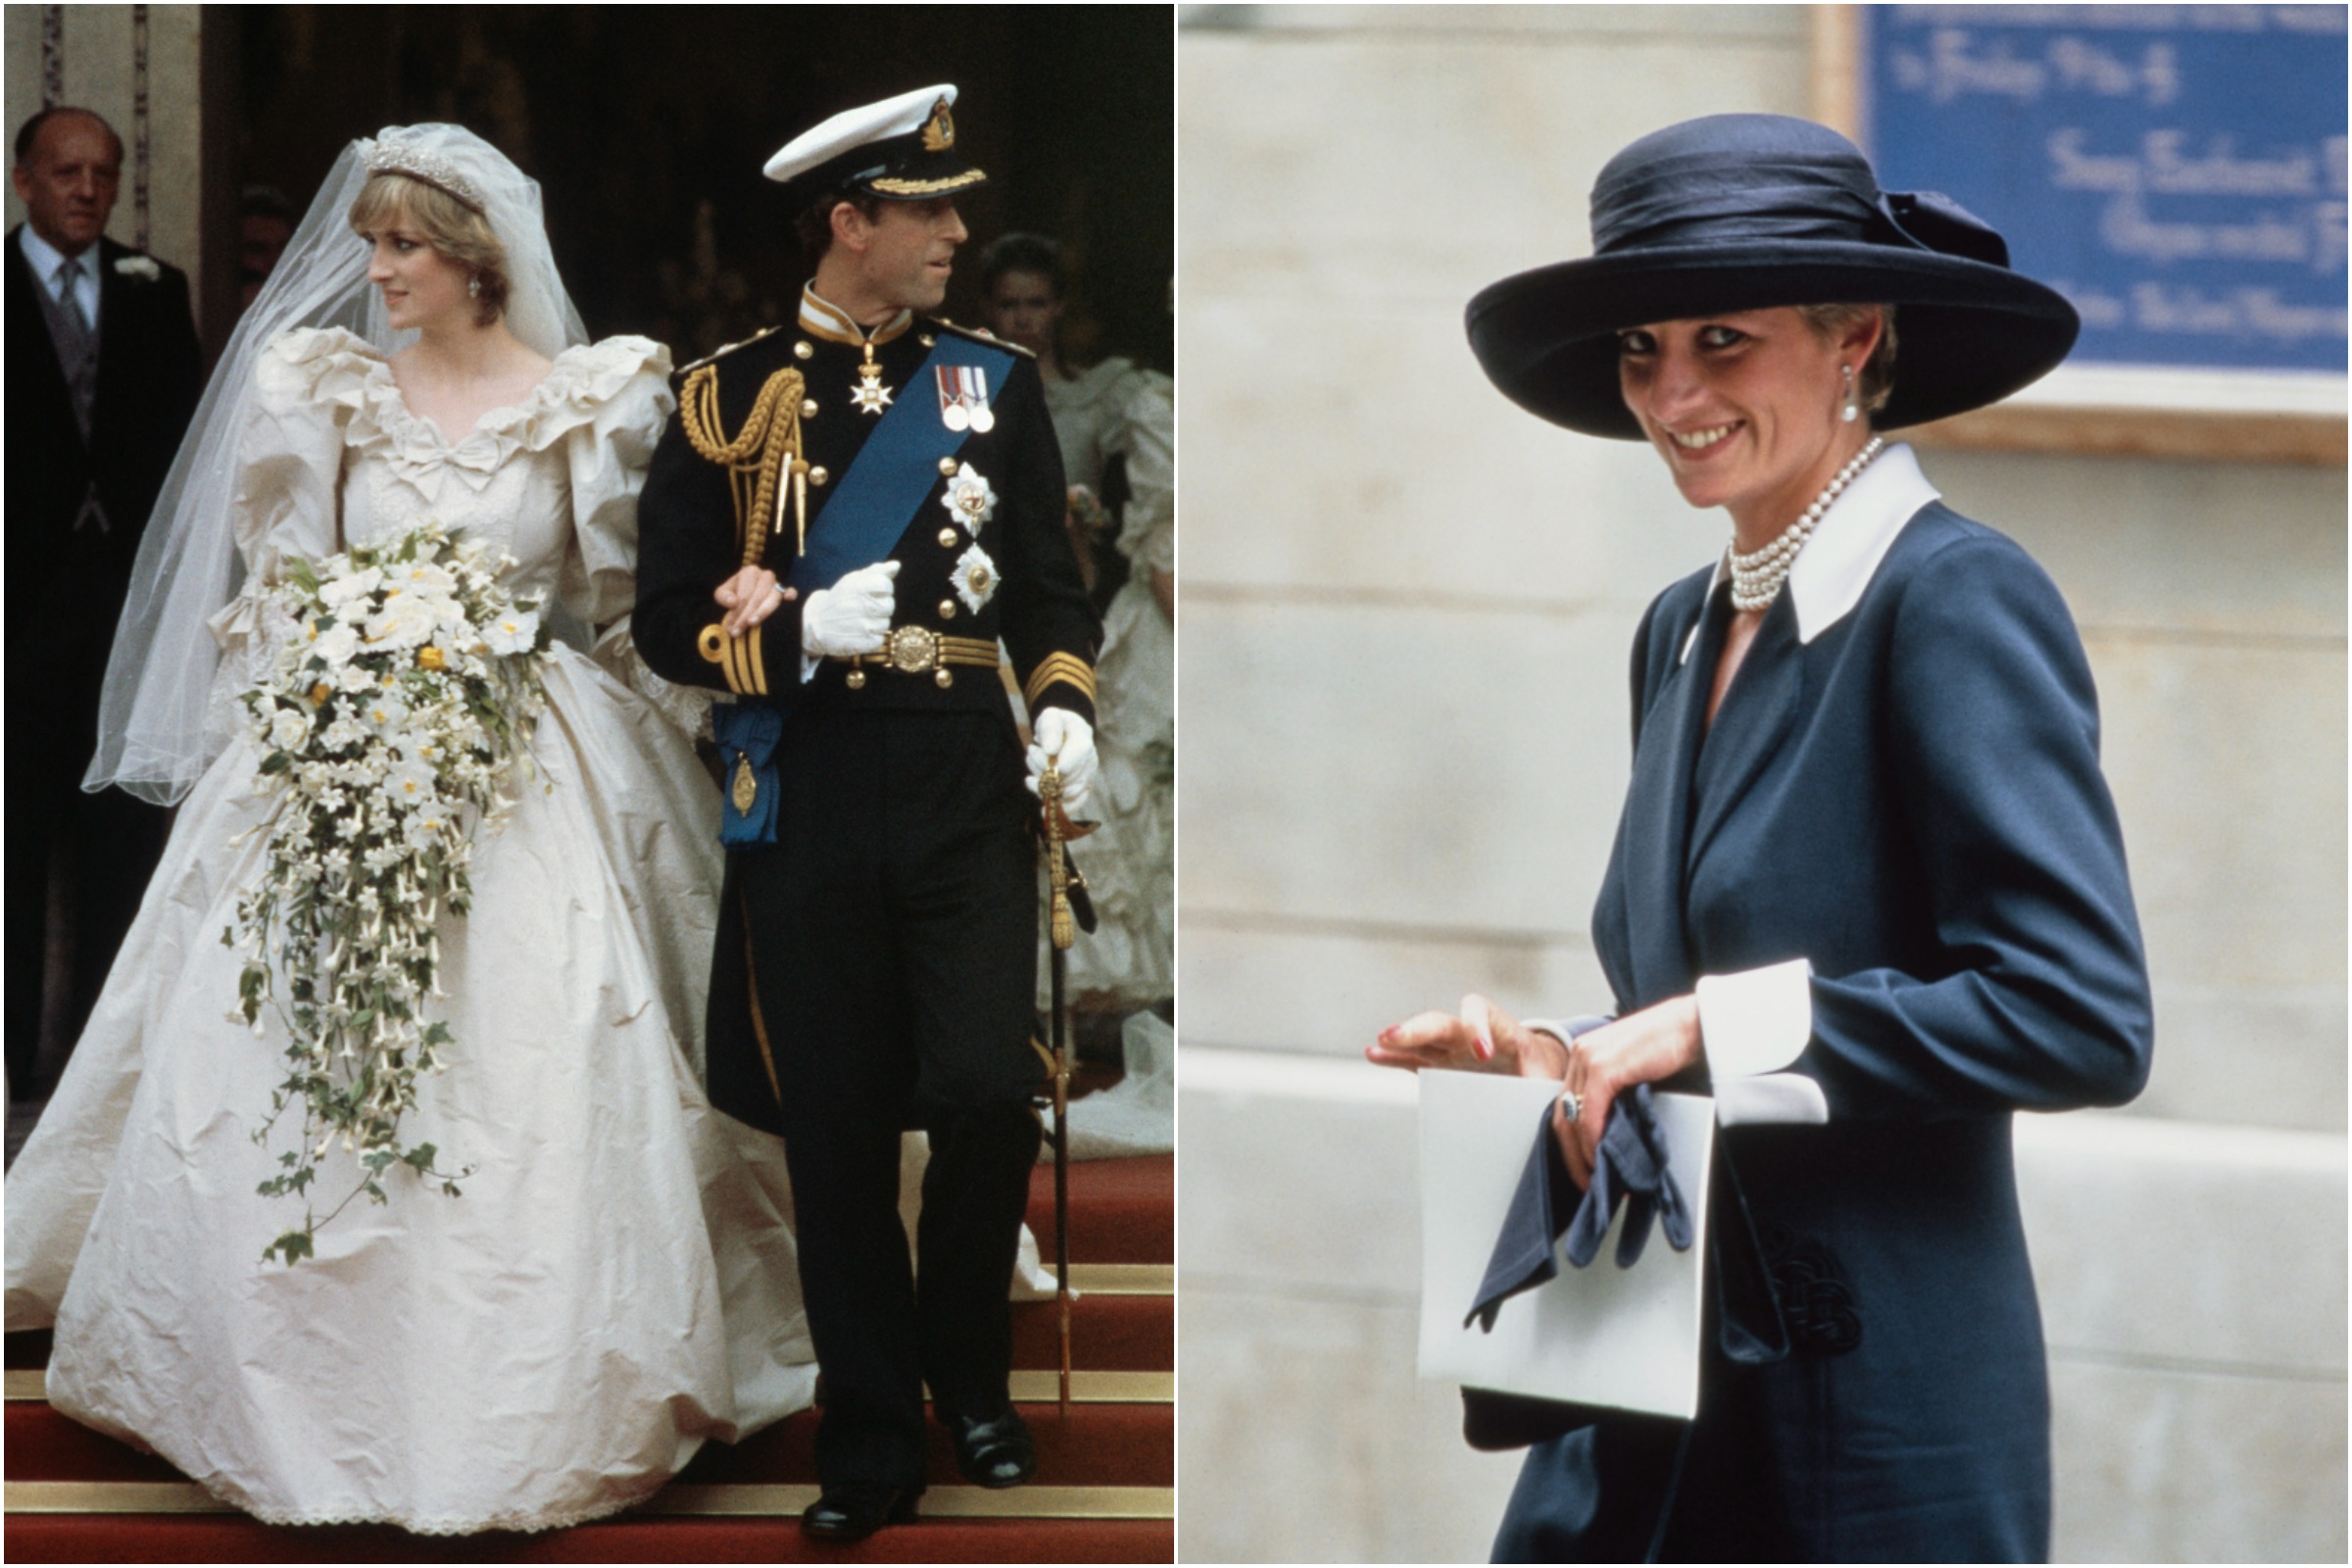 Princess Diana Wedding Details You May Have Missed - PureWow